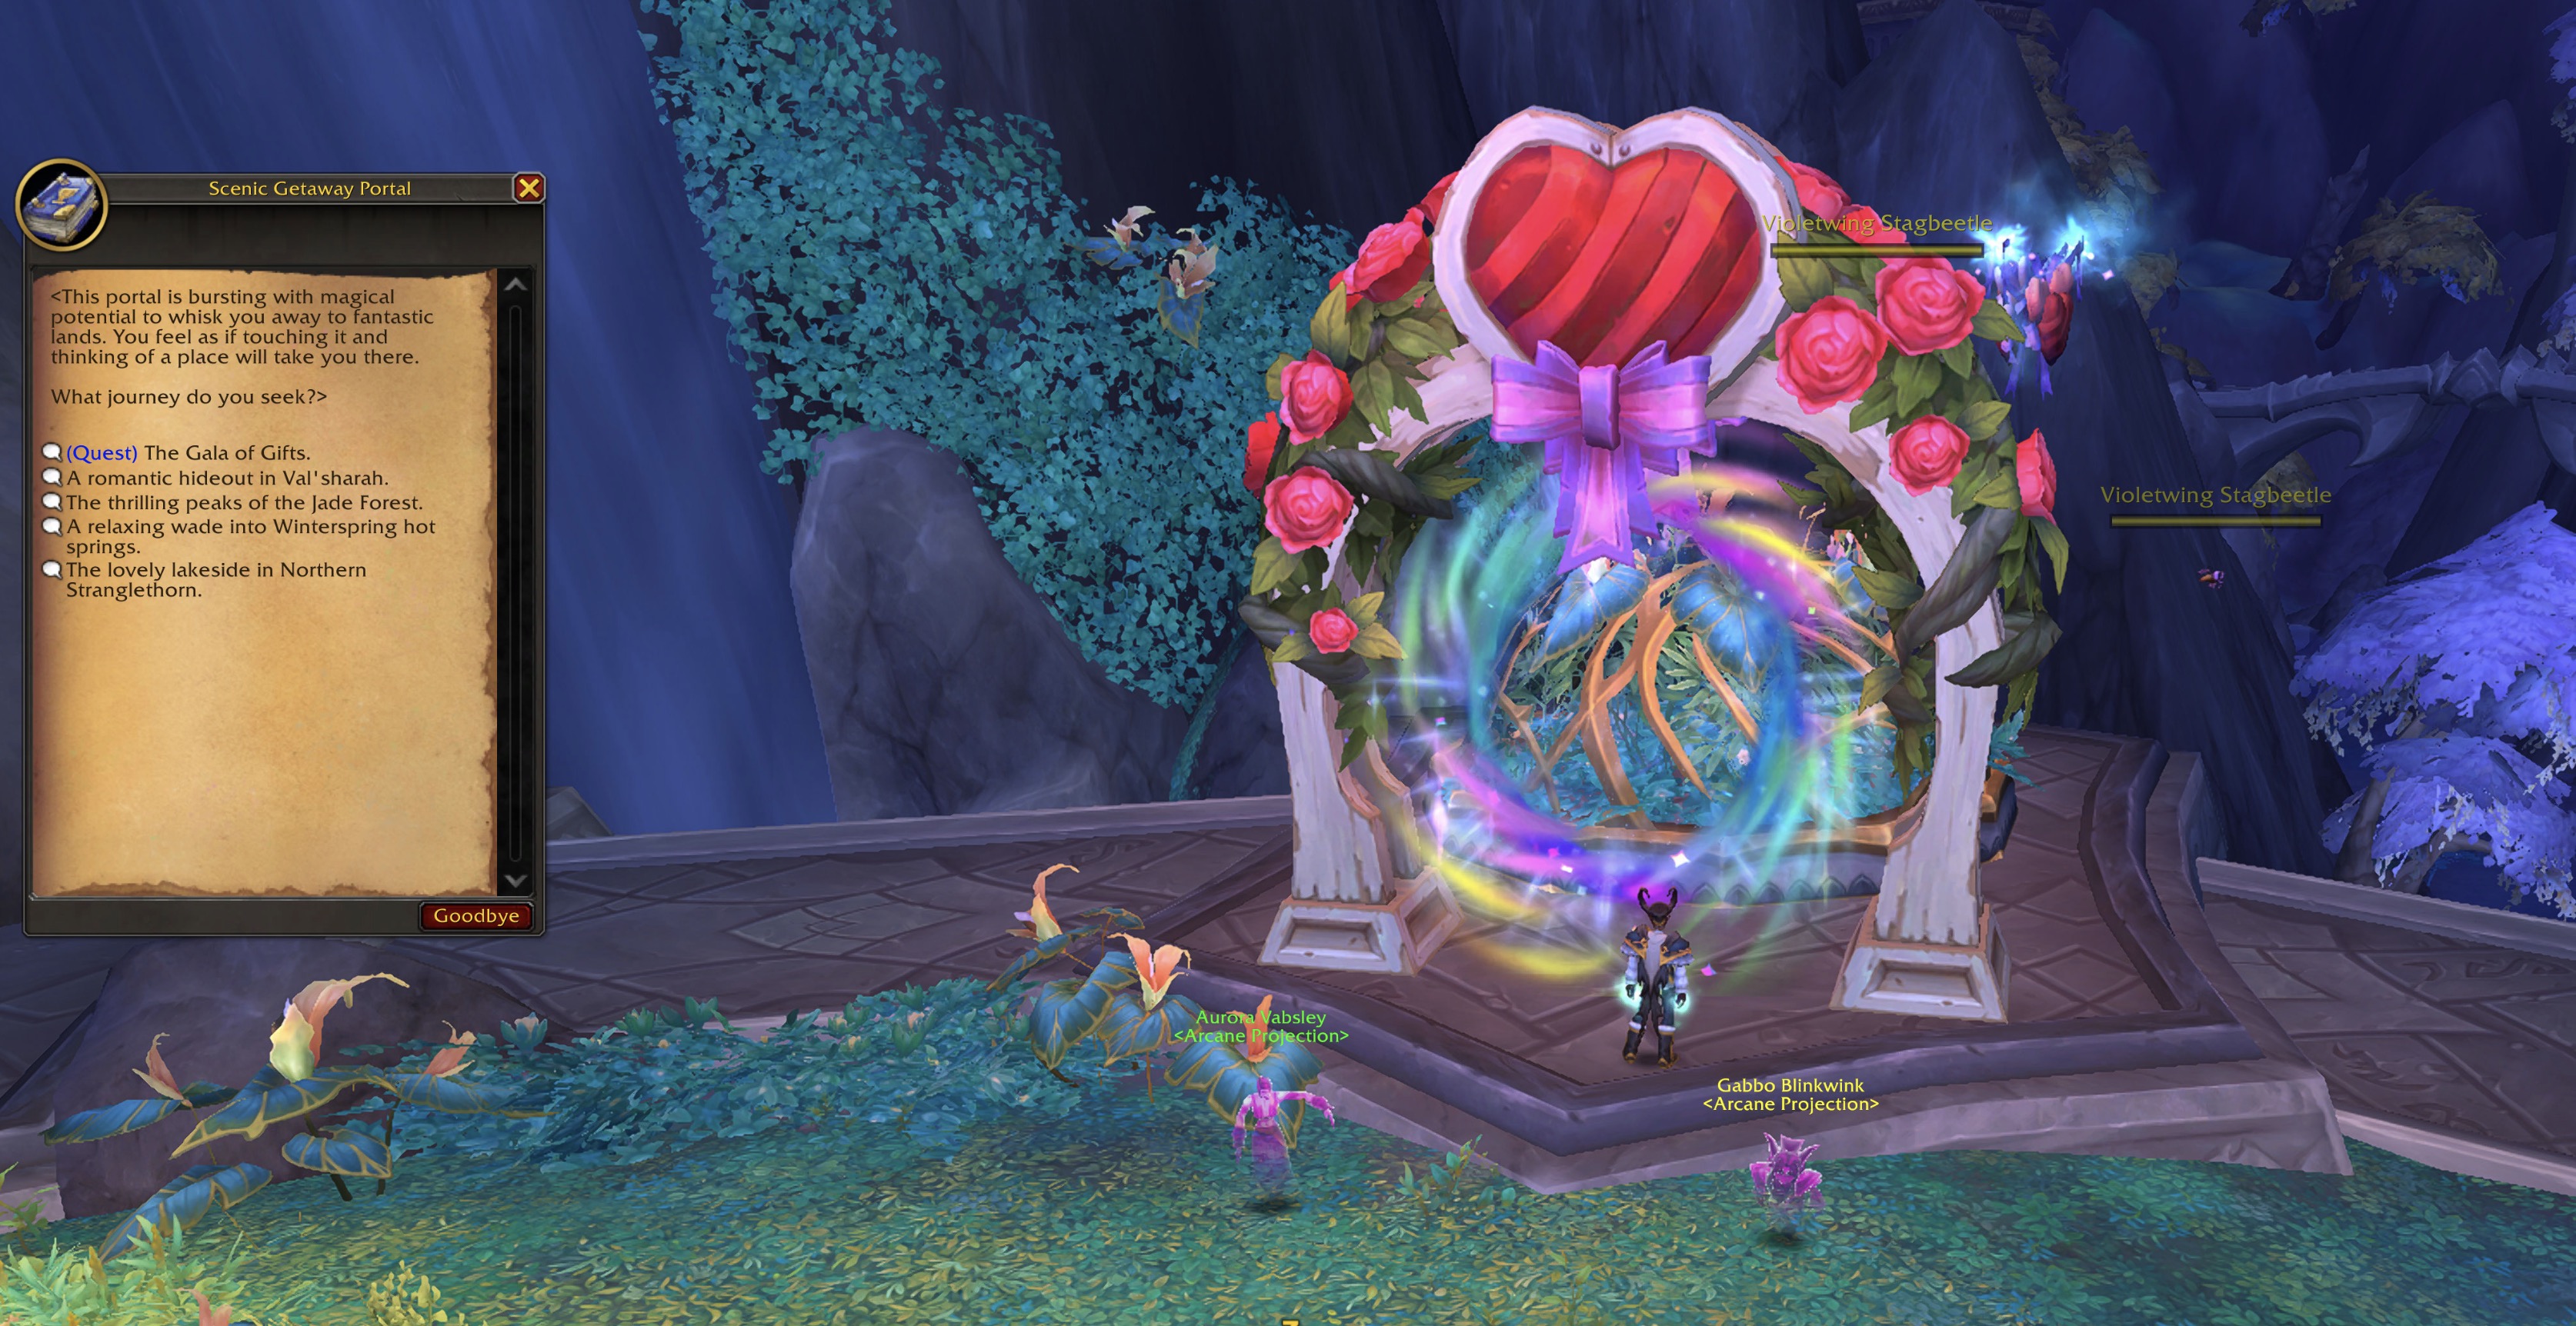 Love is in the Air Event Guide - World of Warcraft Dragonflight - Warcraft  Tavern